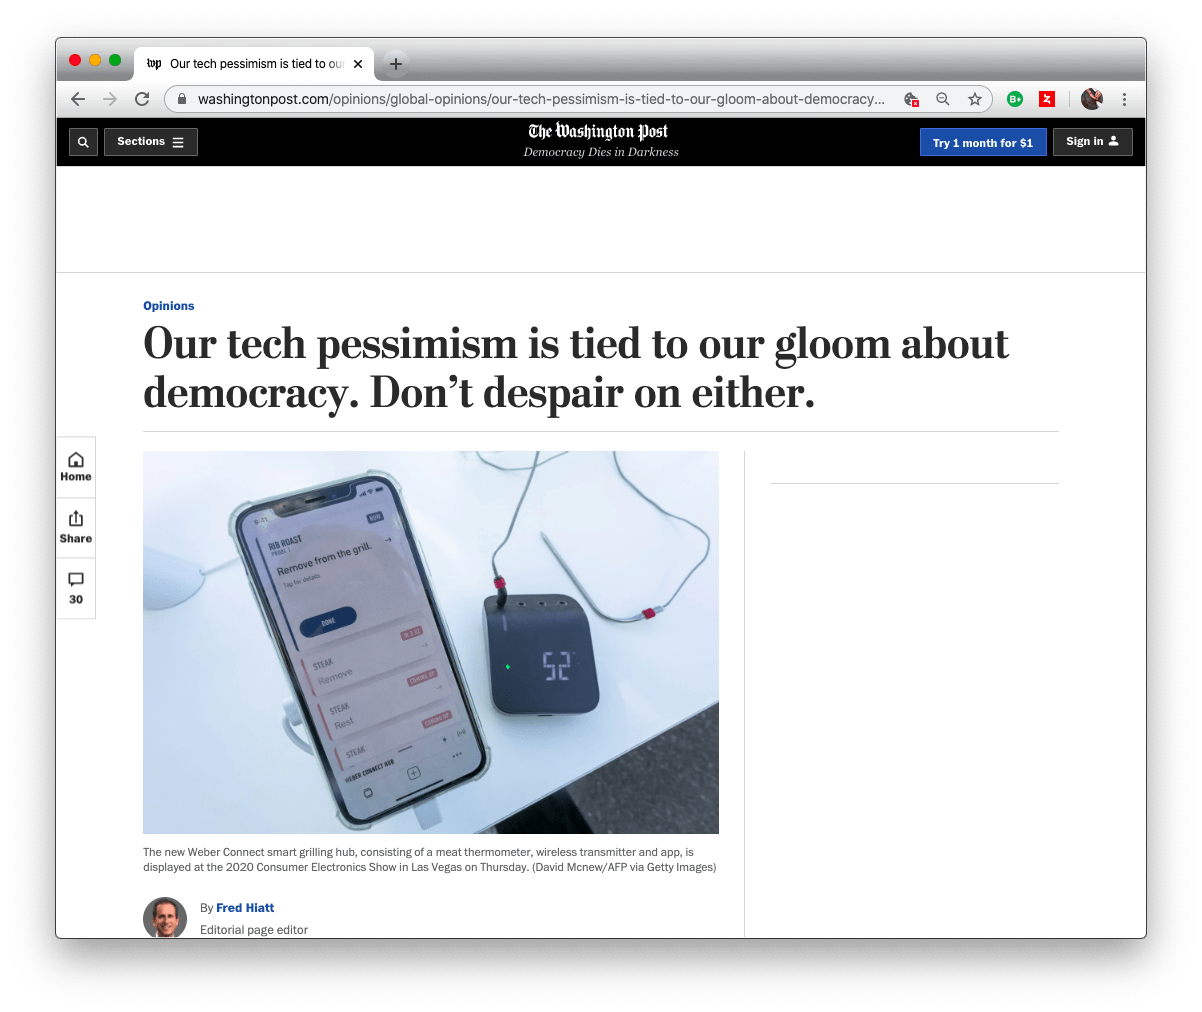 Screenshot of the Fred Hyatt's editorial on pessimism about technology and democracy in the Washington Post